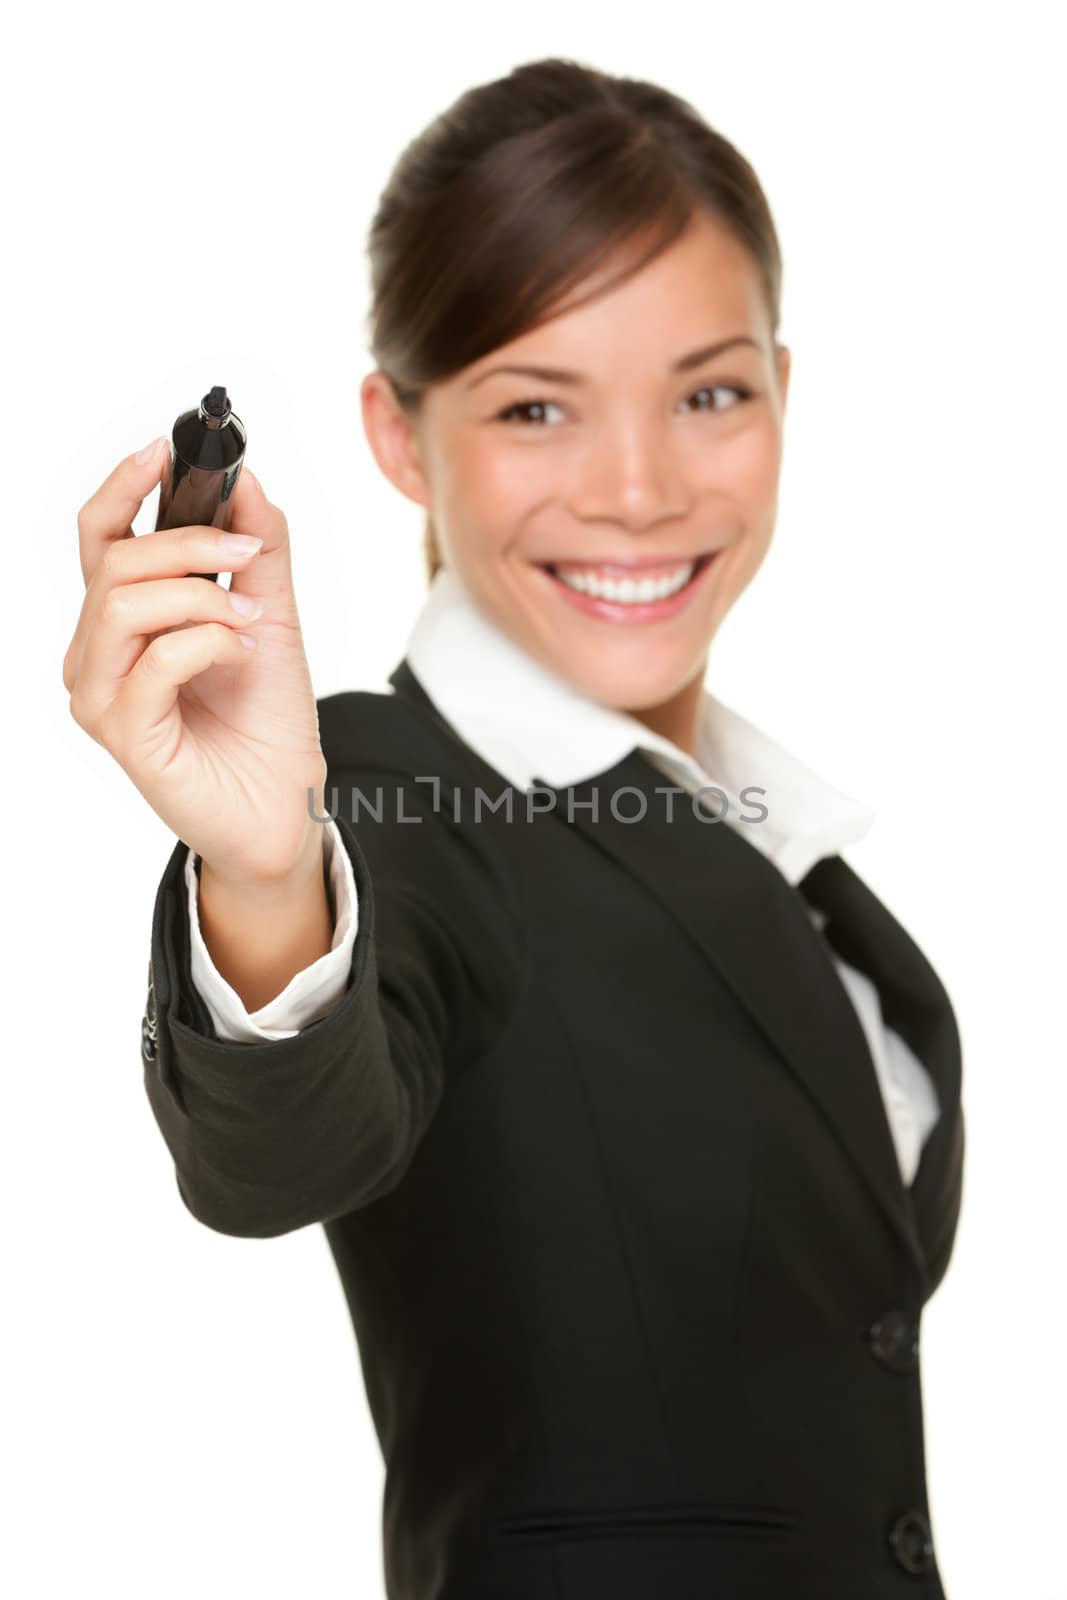 Business woman writing with black marker pen on virtual screen. Young professional smiling wearing suit. Chinese Asian / Caucasian businesswoman isolated on white background.